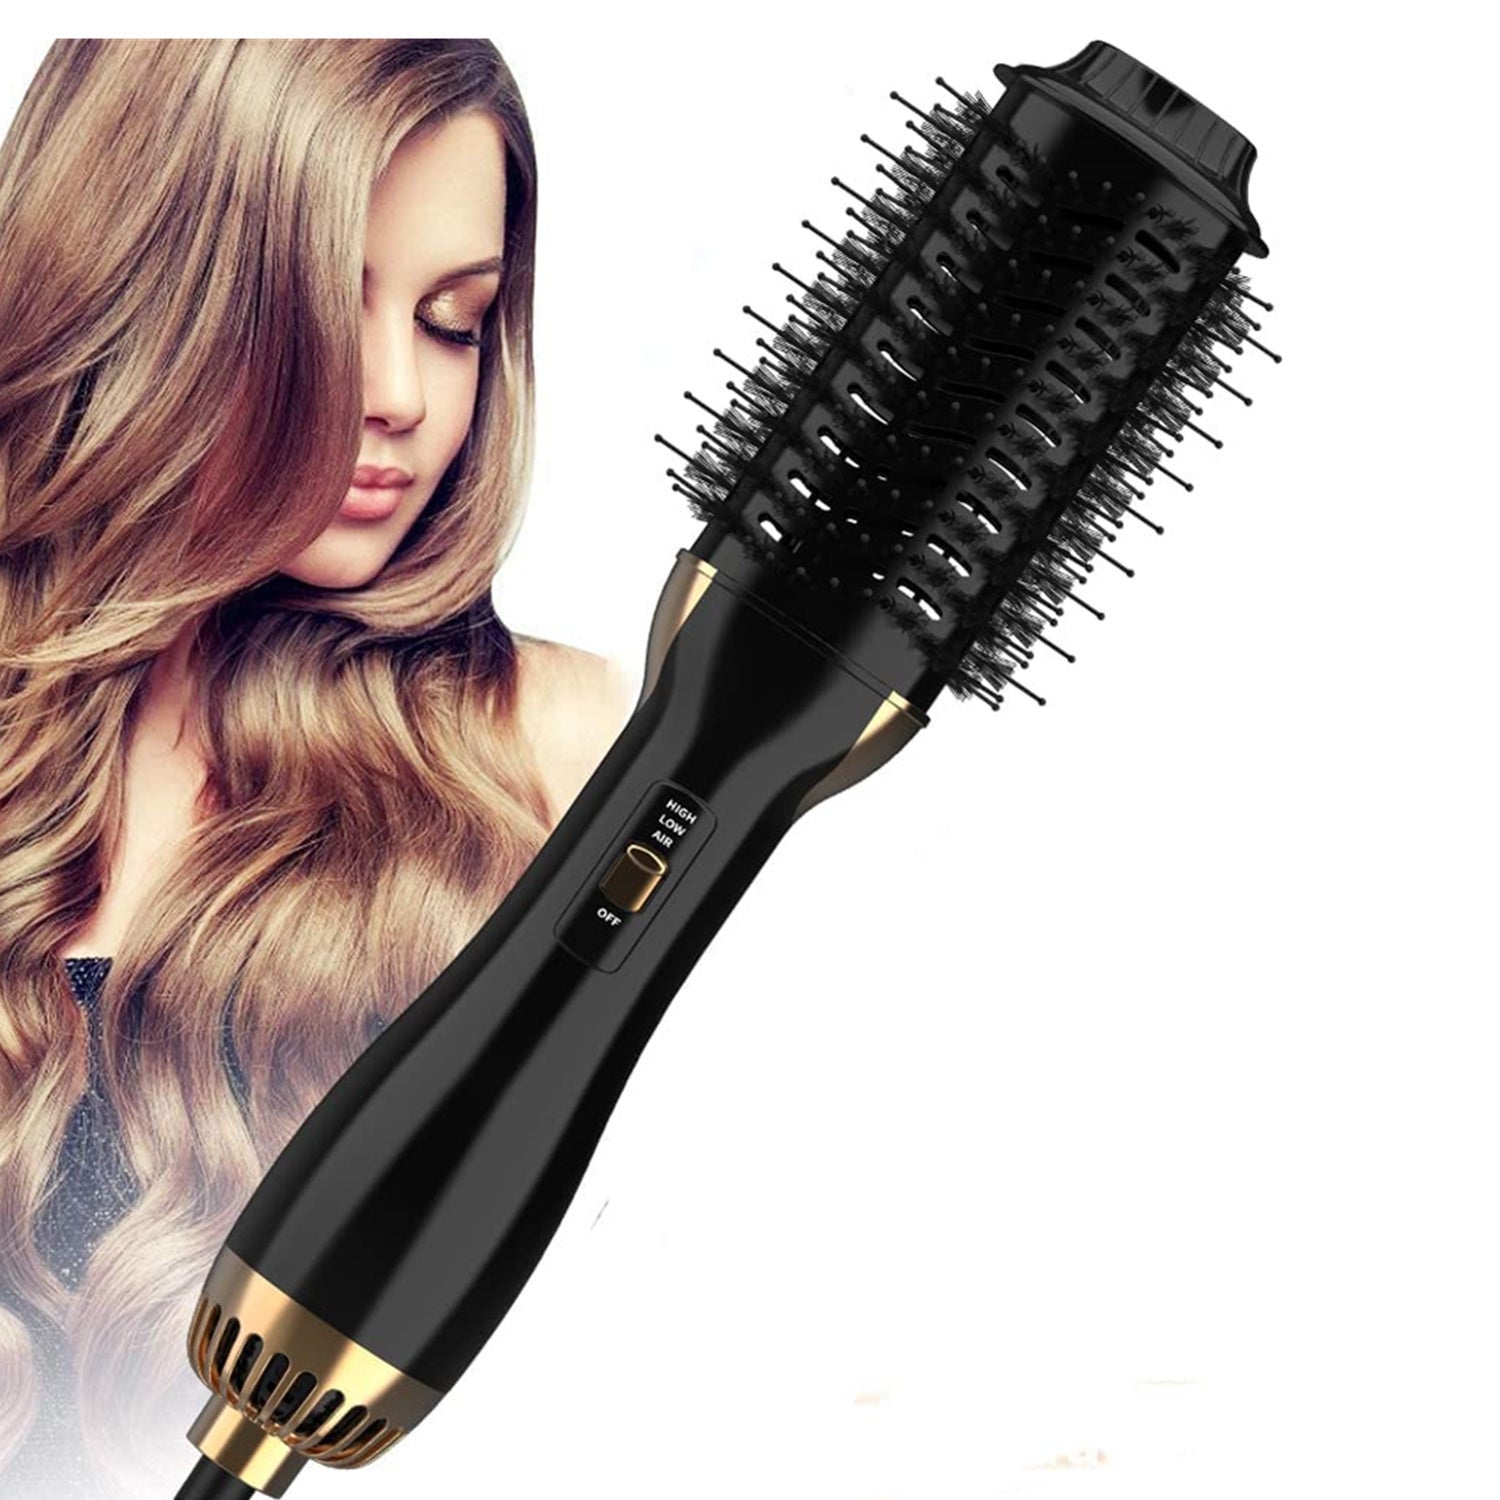 Hair Dryer Blow Brush, 4IN1 Blow Dryer One Step Hot Air Brush for All Hair Types